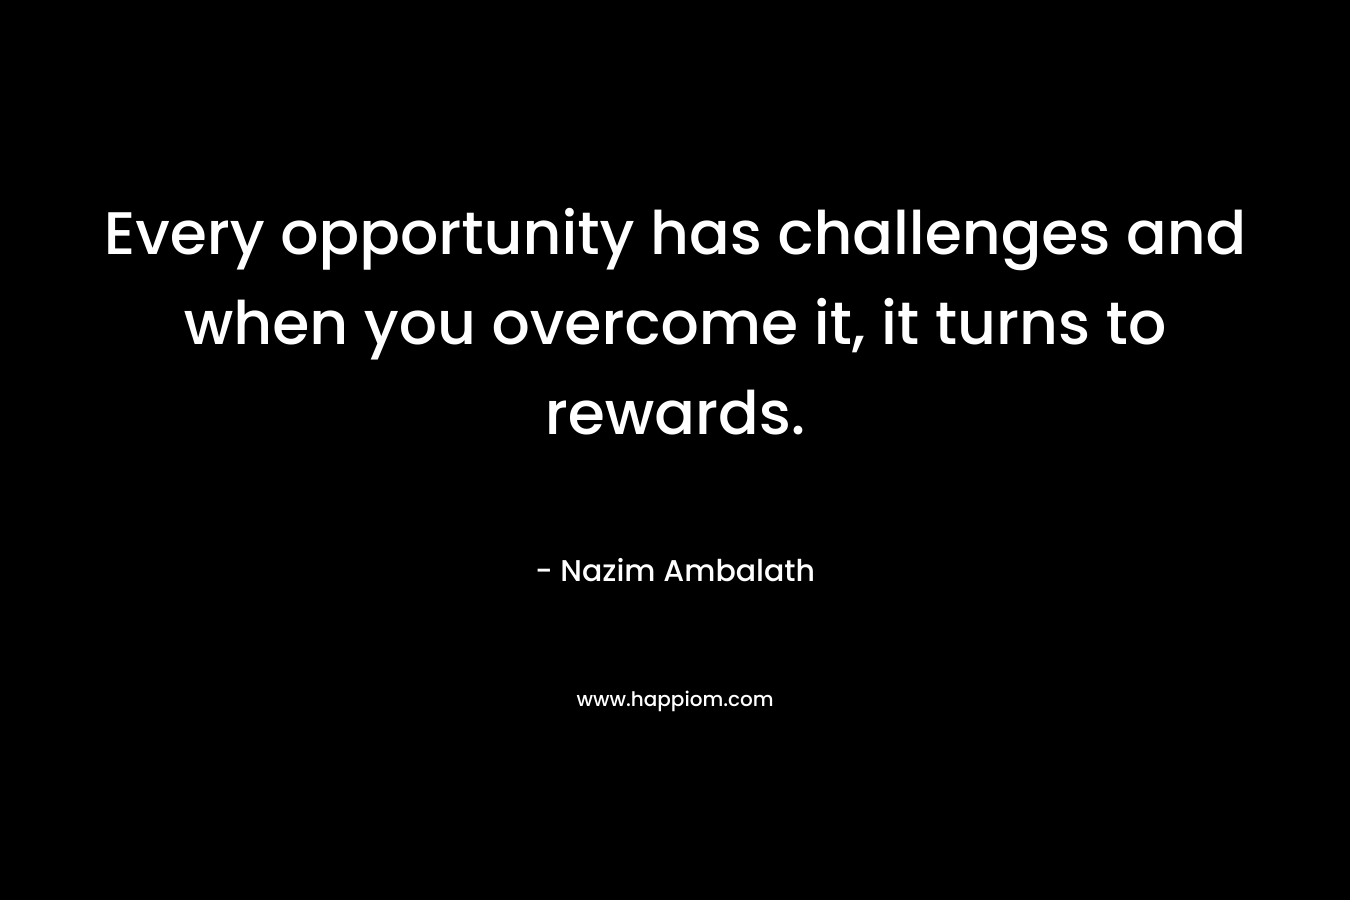 Every opportunity has challenges and when you overcome it, it turns to rewards. – Nazim Ambalath